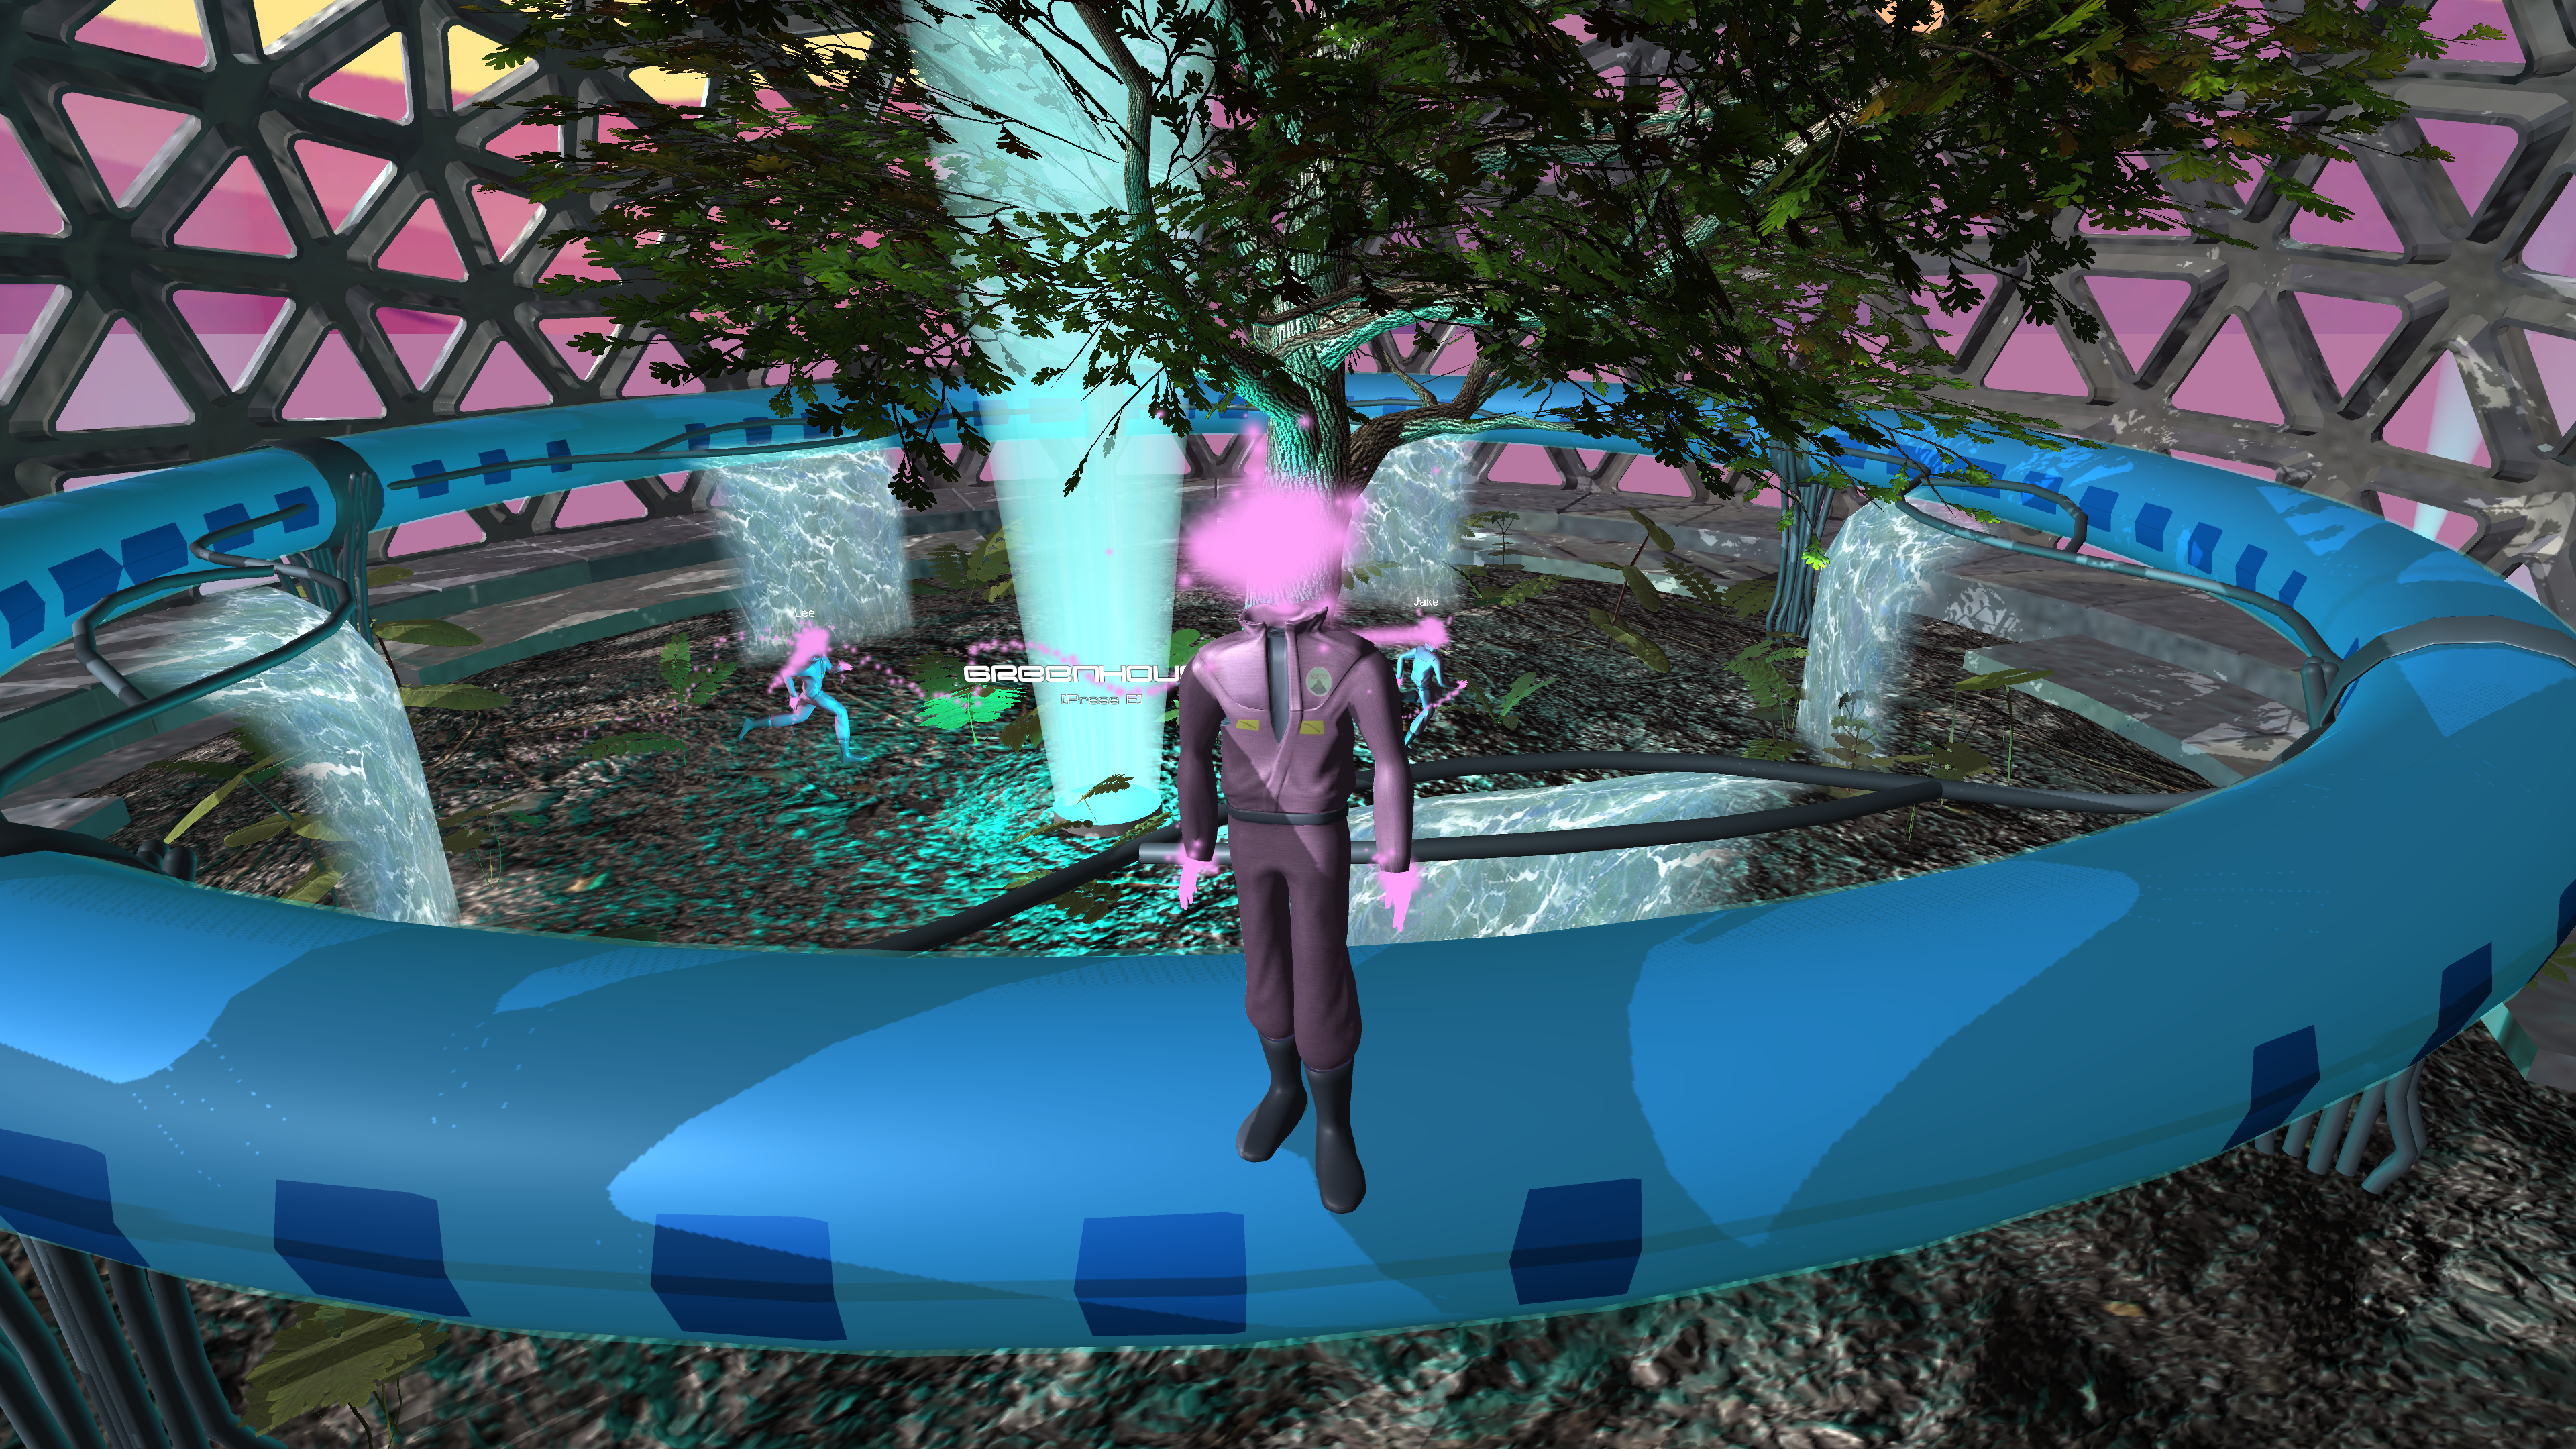 A digital rendering of a violet, spirit-like figure, wearing a lavender jumpsuit and with a cloud of smoke in place of a head, stands amidst a sci-fi environment within a large geodesic dome. A large tree, blue tunnel, and two running figures are also inside of the dome.